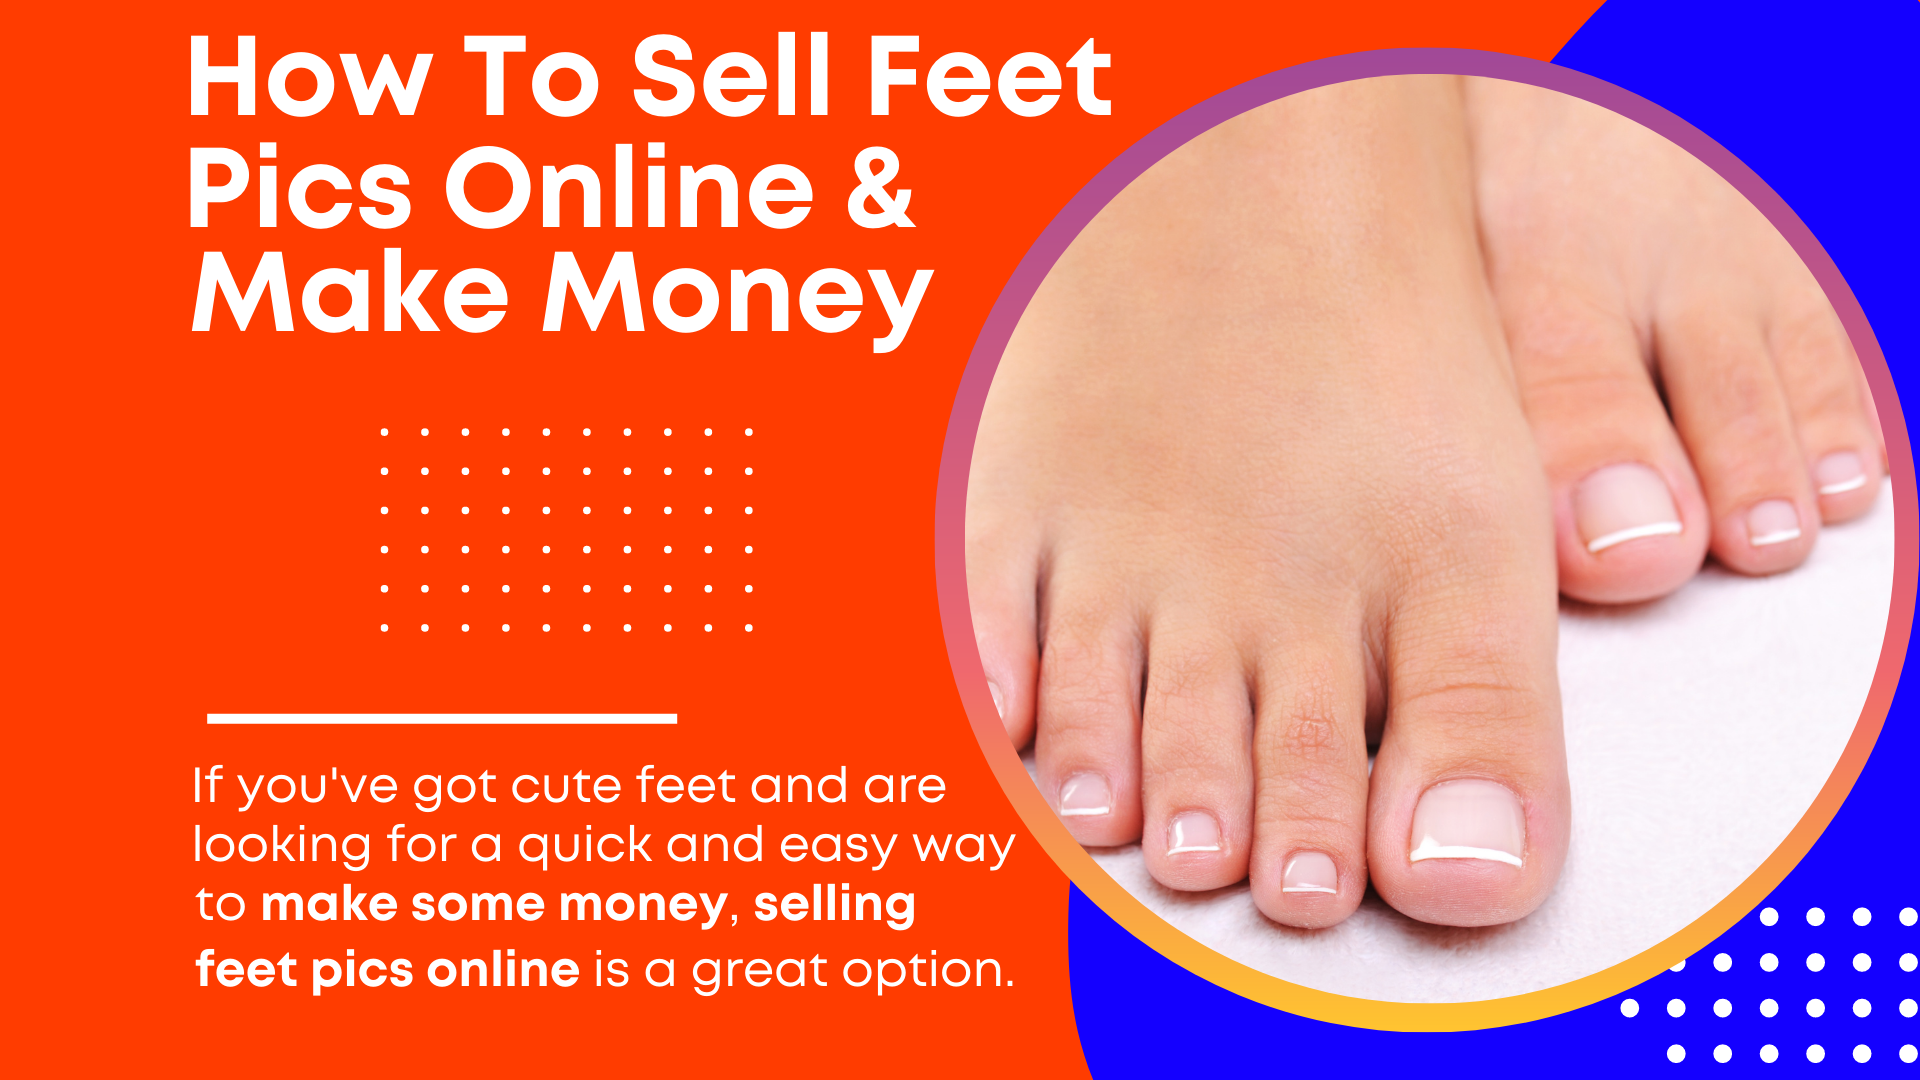 How To Sell Feet Pics Online And Make Money Quick